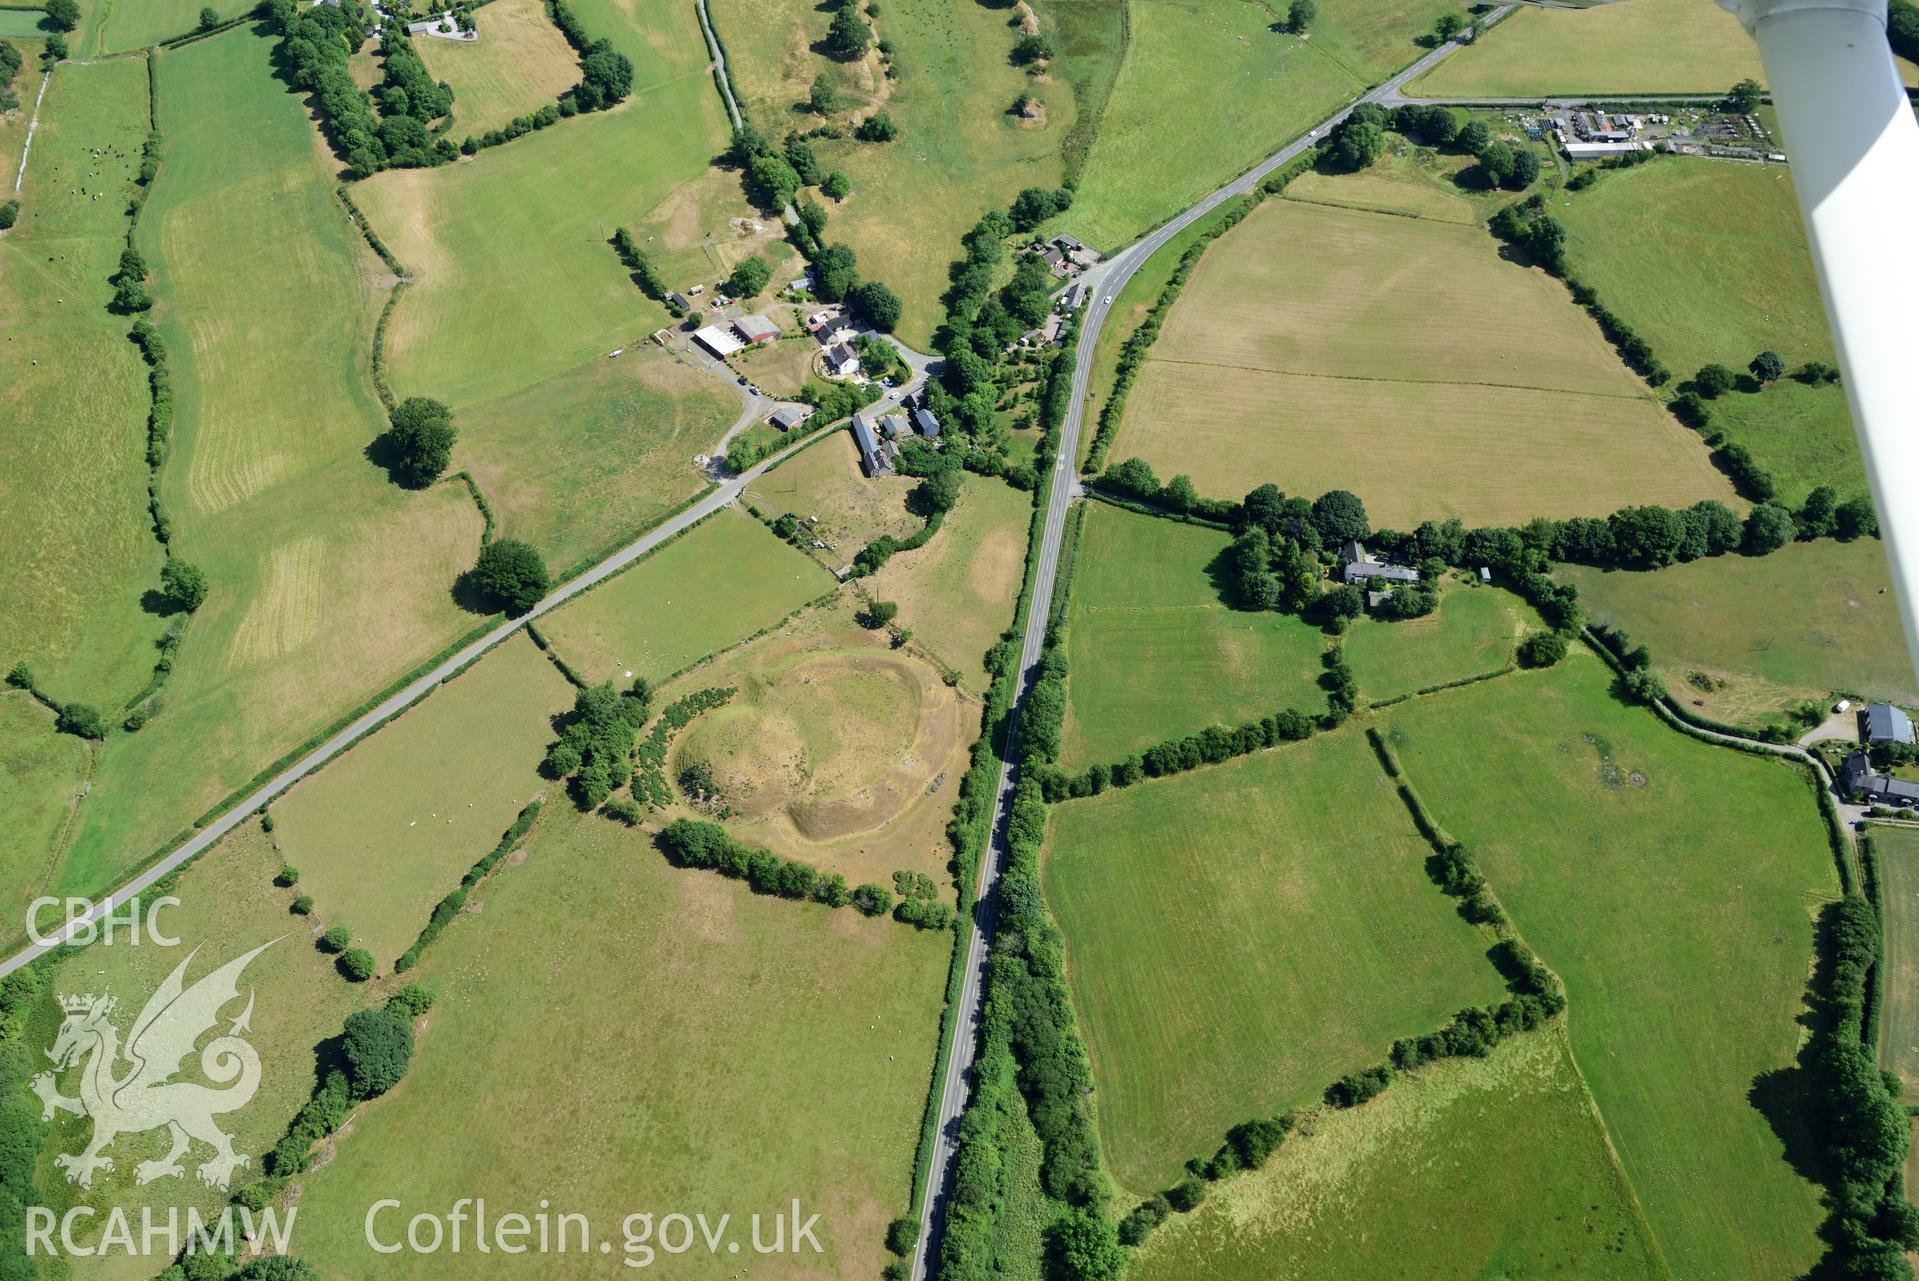 Royal Commission aerial photography of Tomen y Rhodwydd with parchmarks, taken on 19th July 2018 during the 2018 drought.